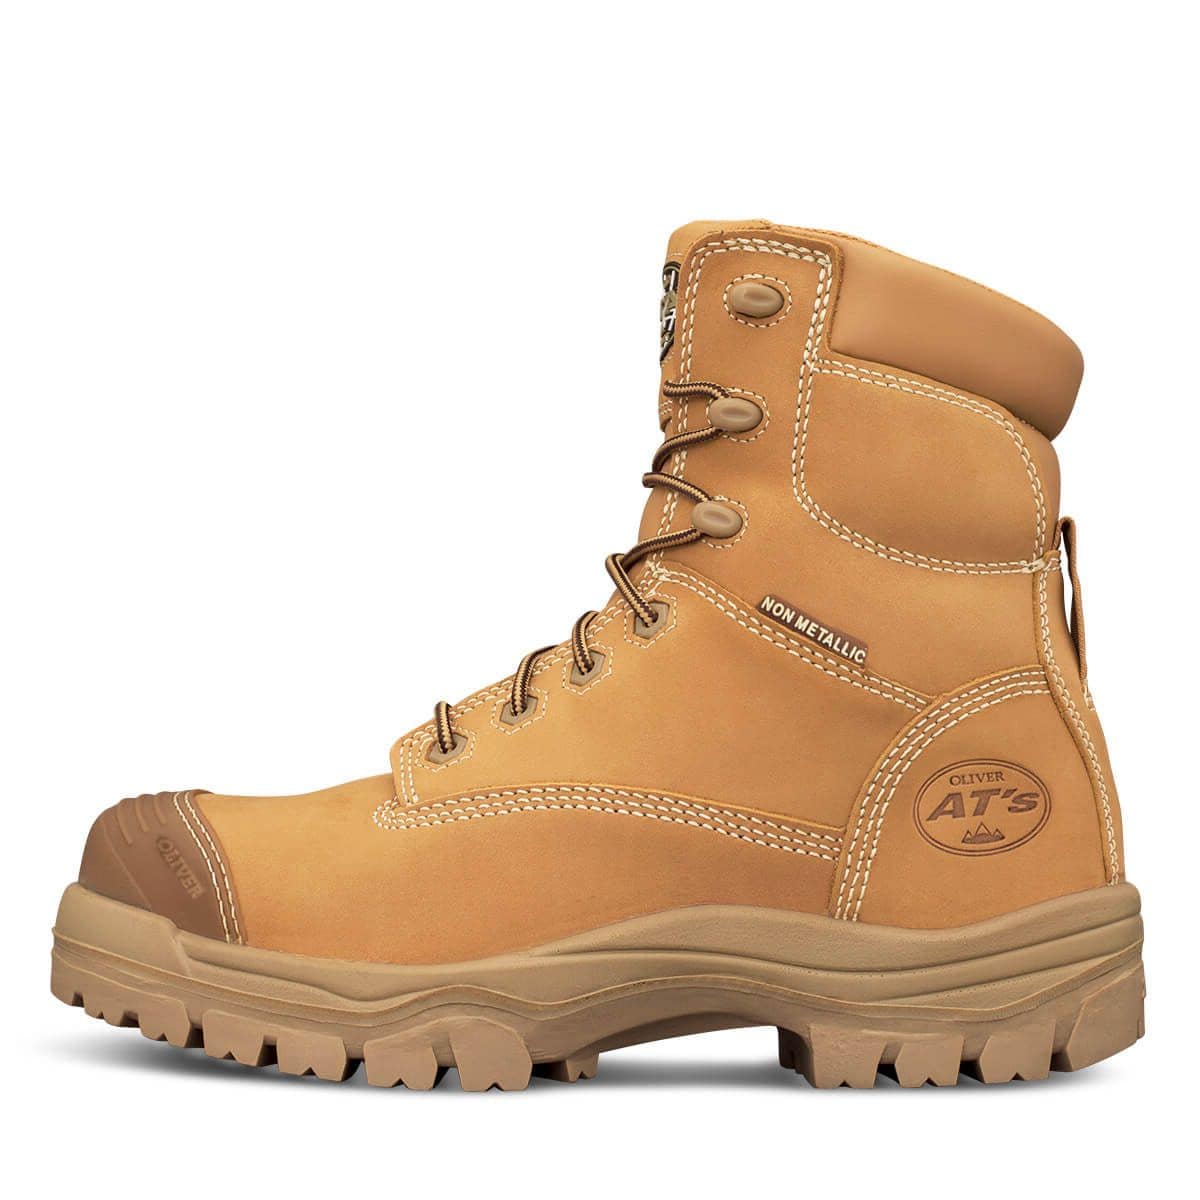 Oliver Mens 45-632Z 150mm Zip at Boots Comp Bump tpu Wheat 5